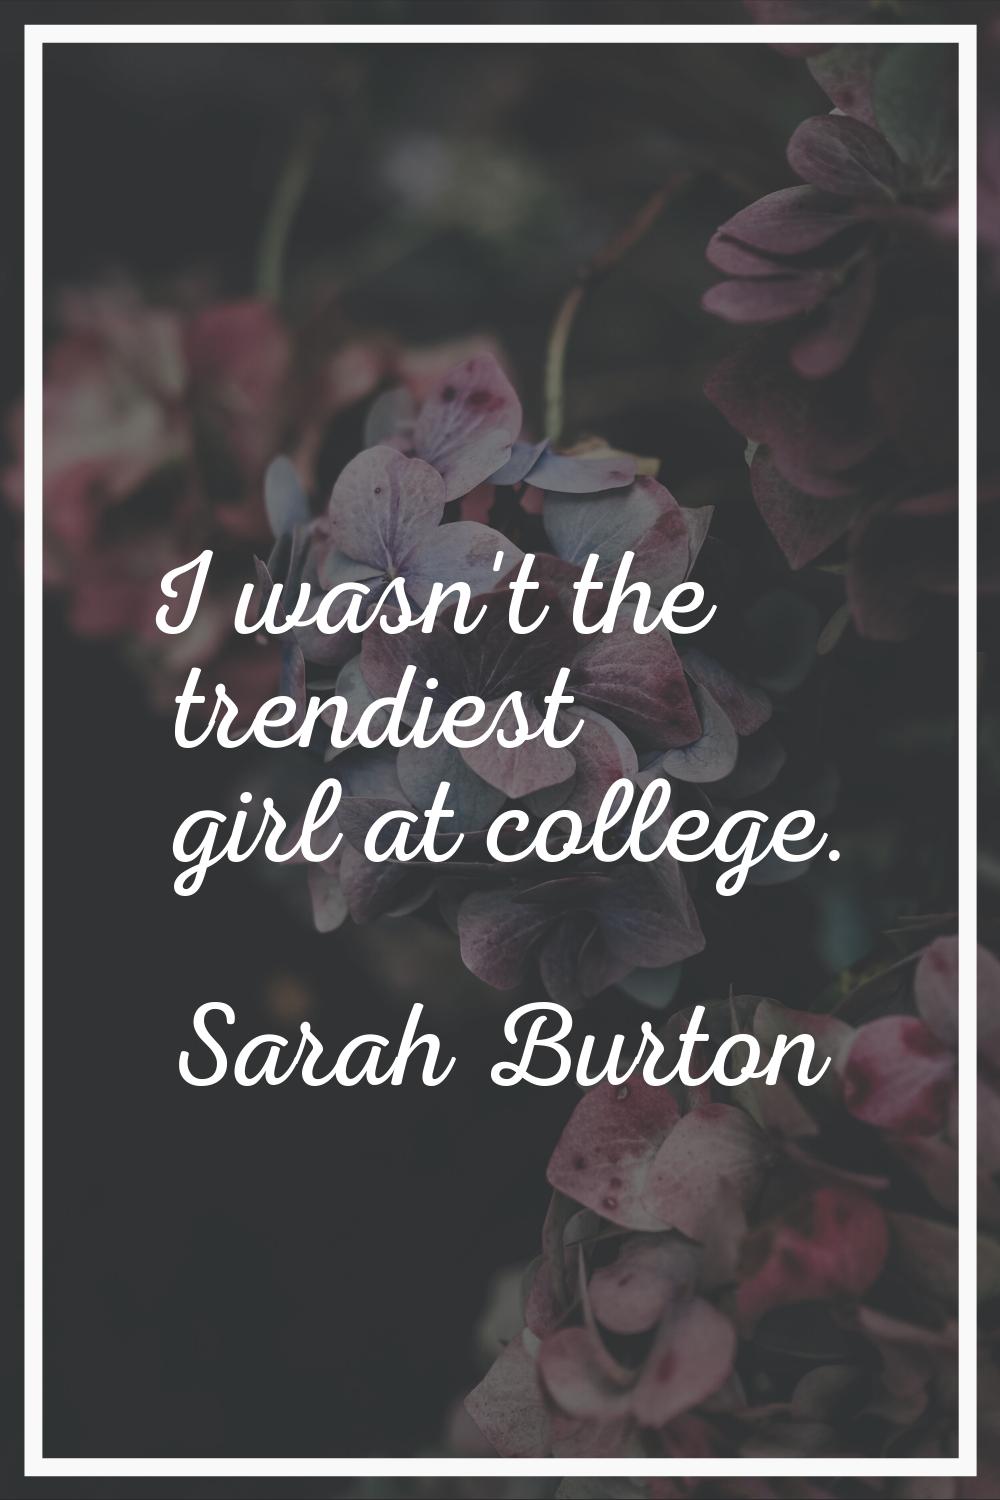 I wasn't the trendiest girl at college.